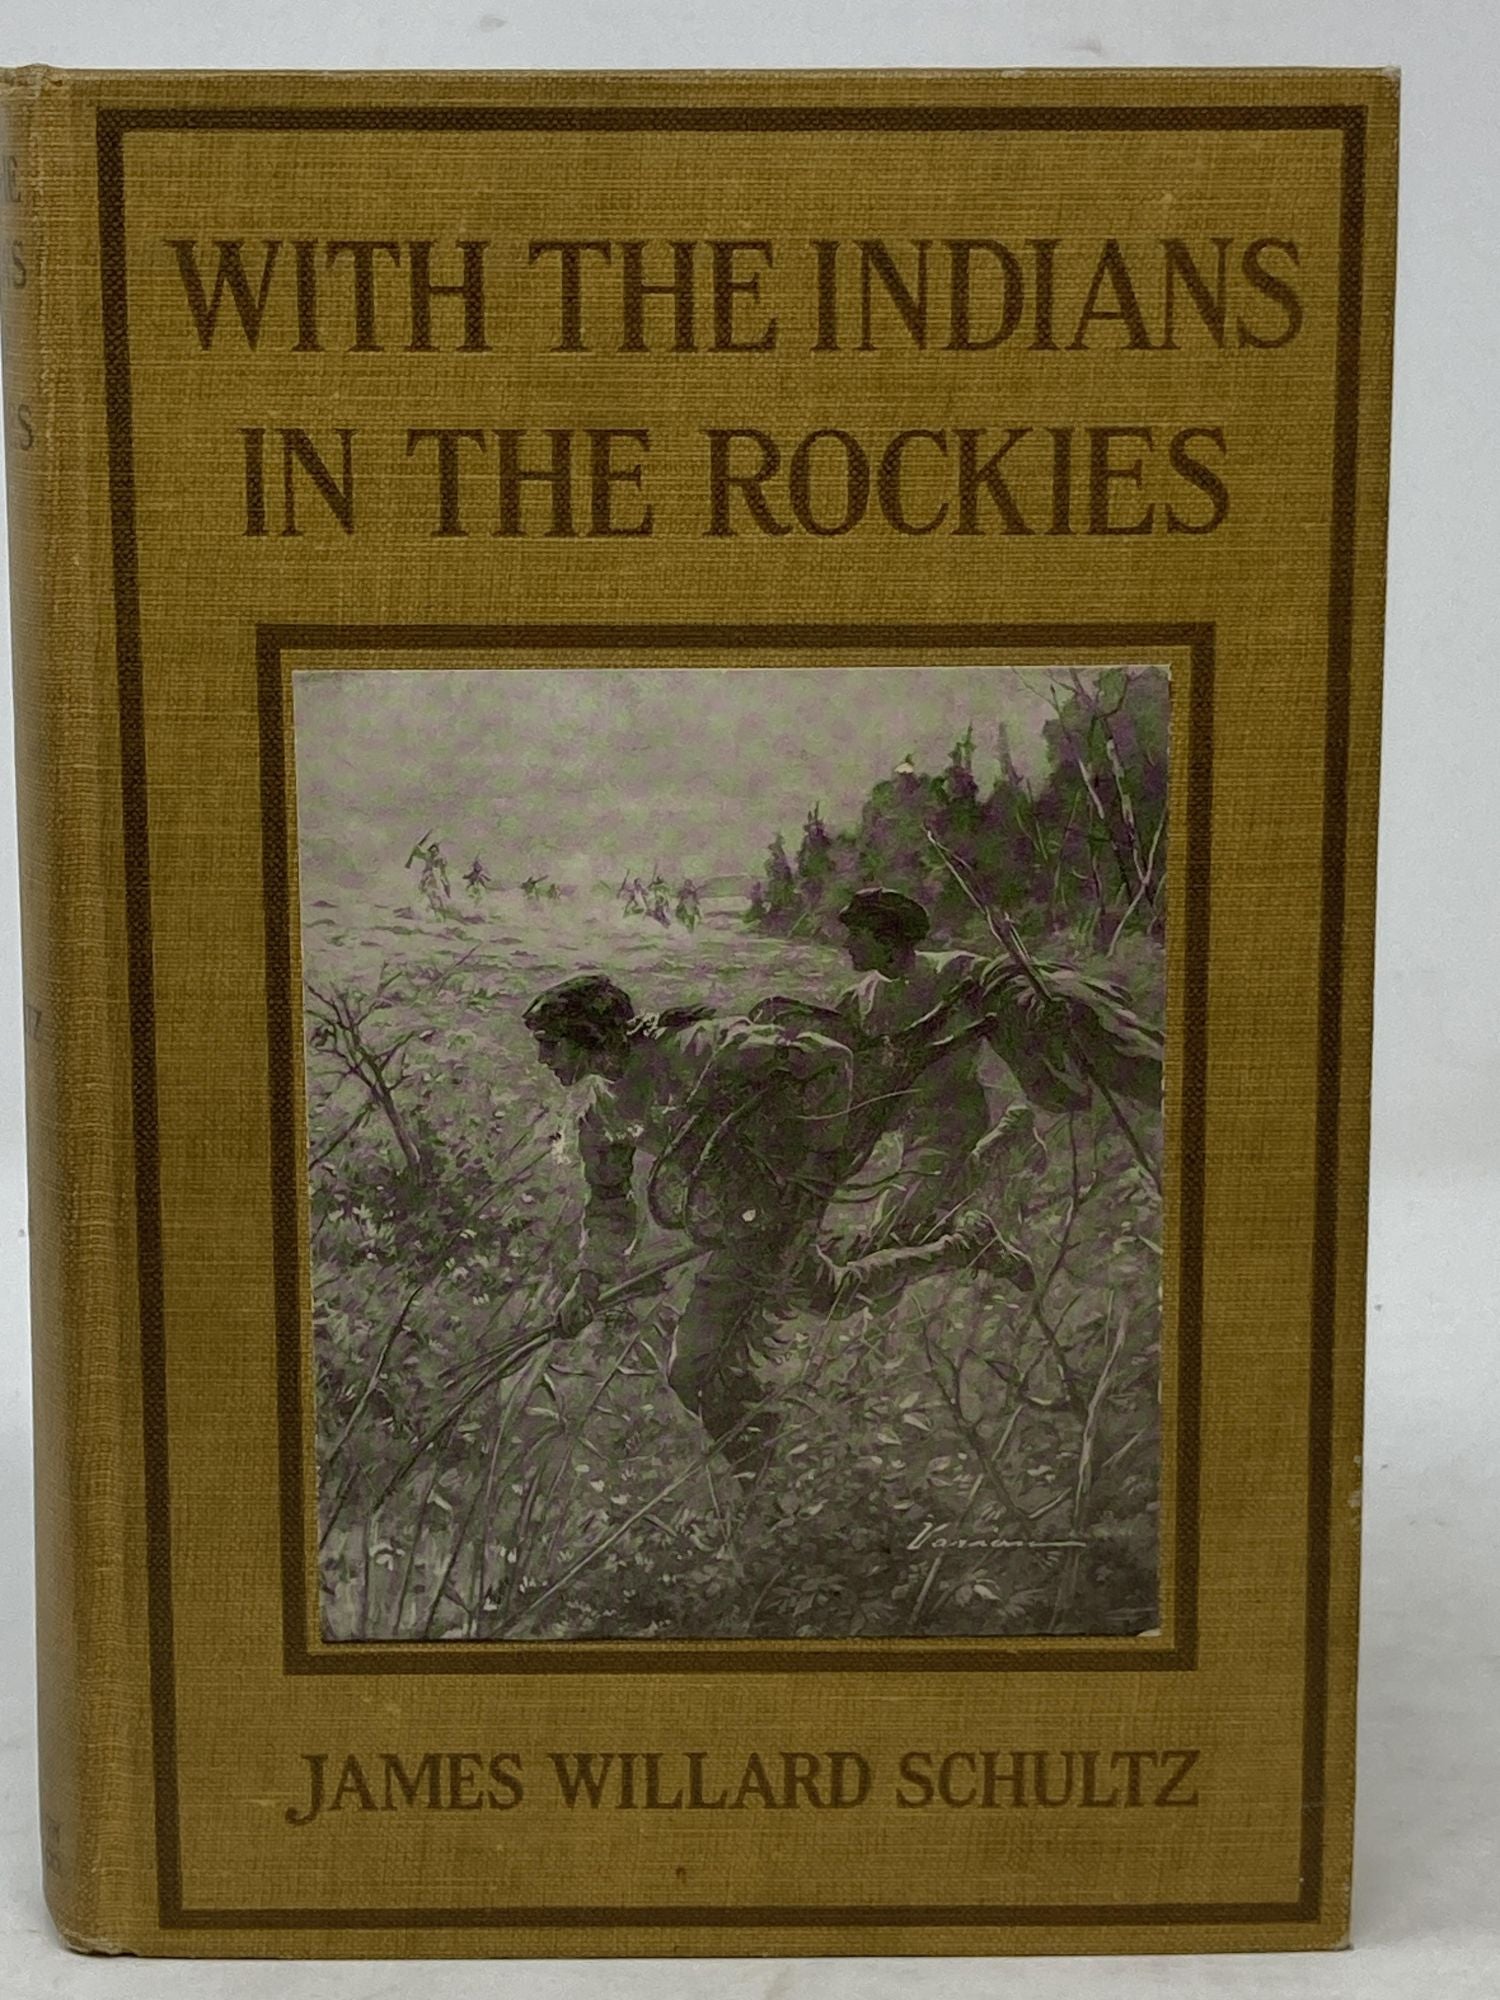 Schultz, James Willard - With the Indians in the Rockies; with Illustrations by George Varian